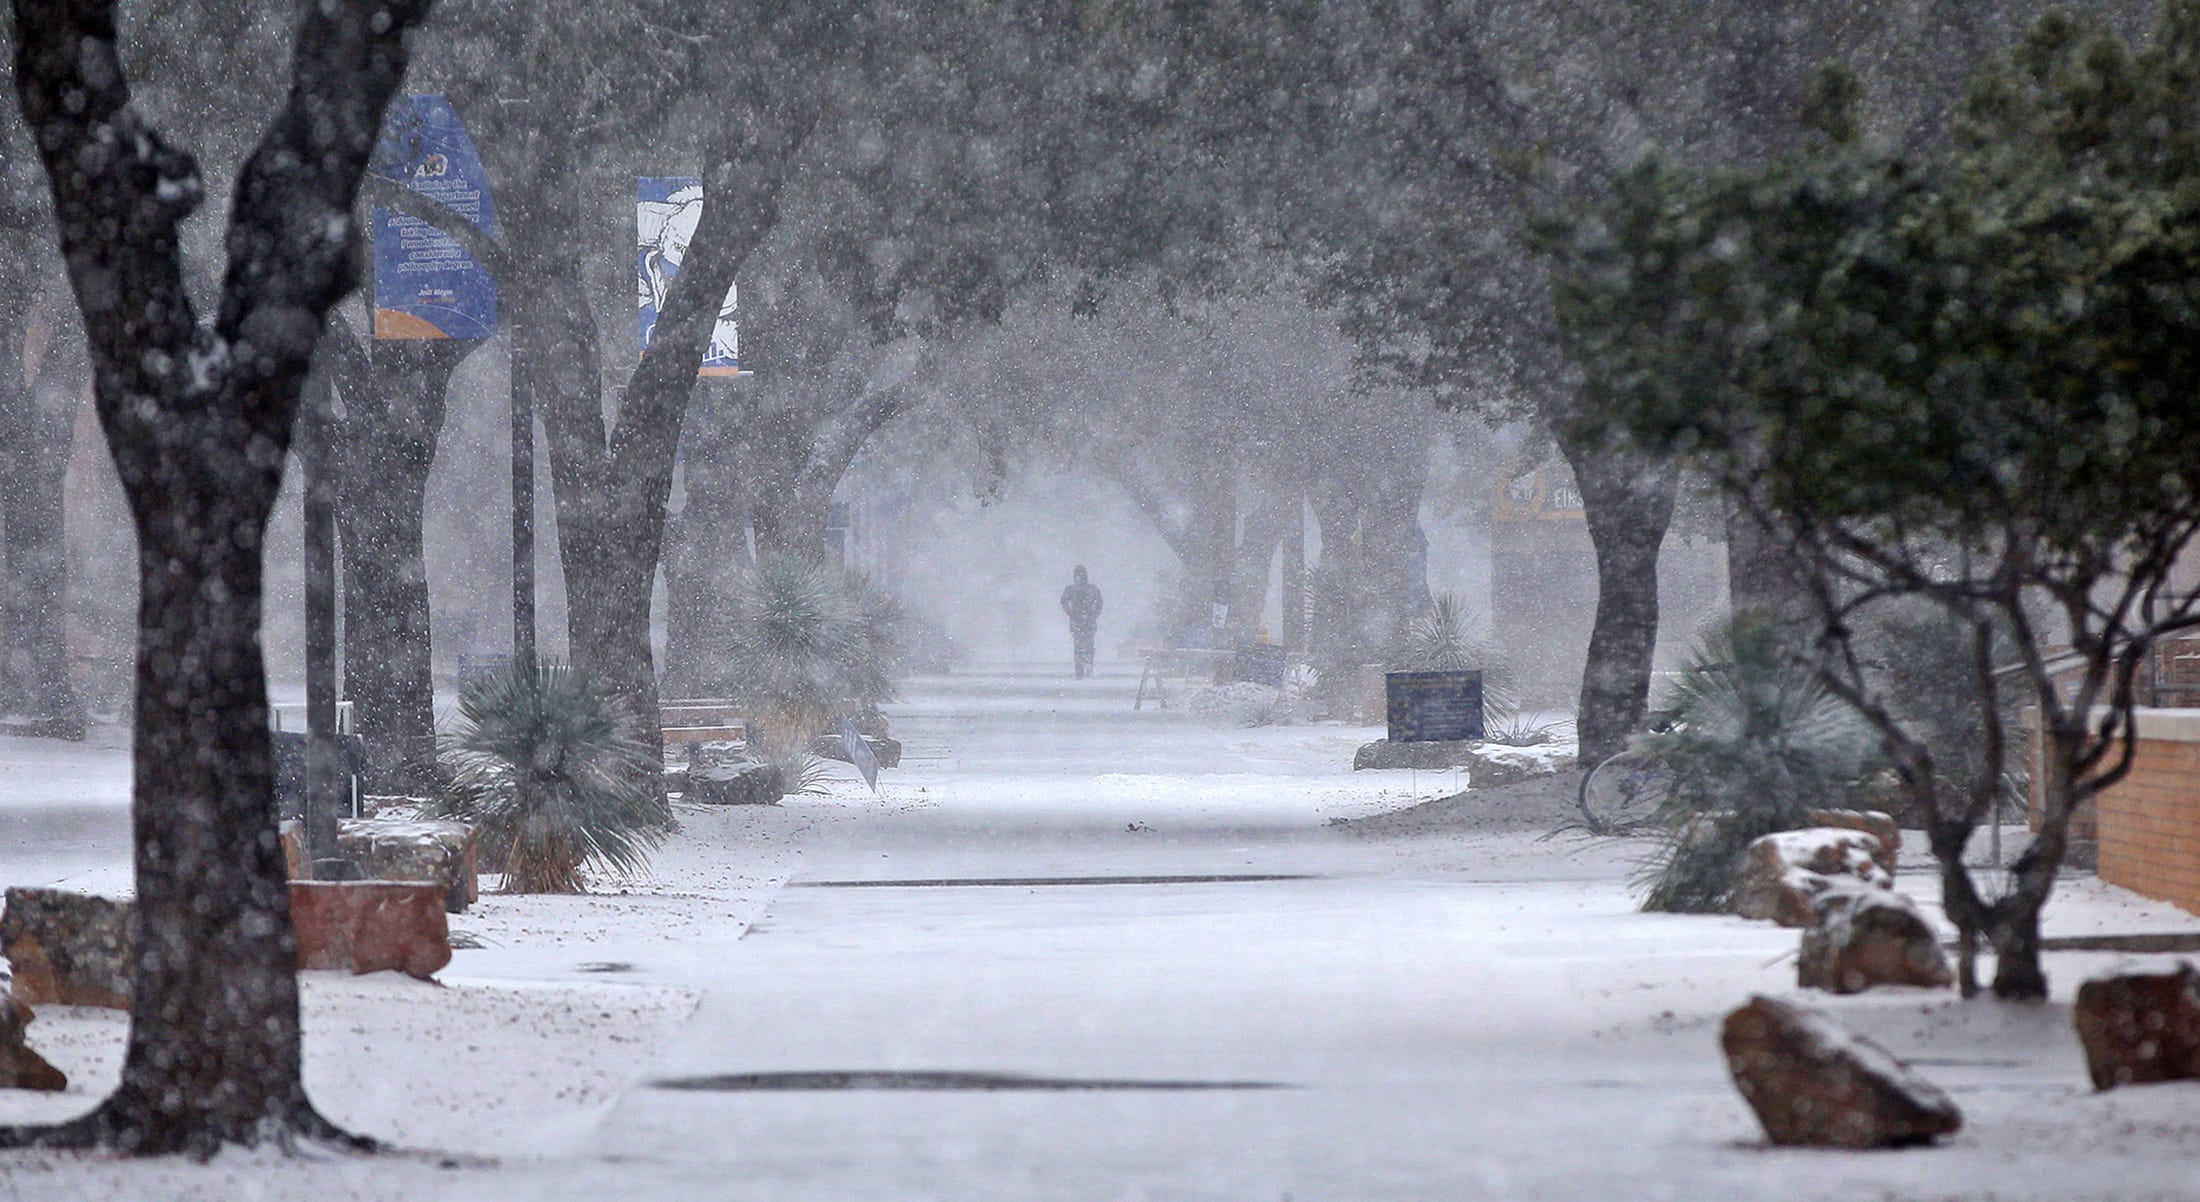 A pedestrian walks through the snow on the Angelo State University campus Sunday, Feb. 14, 2021.